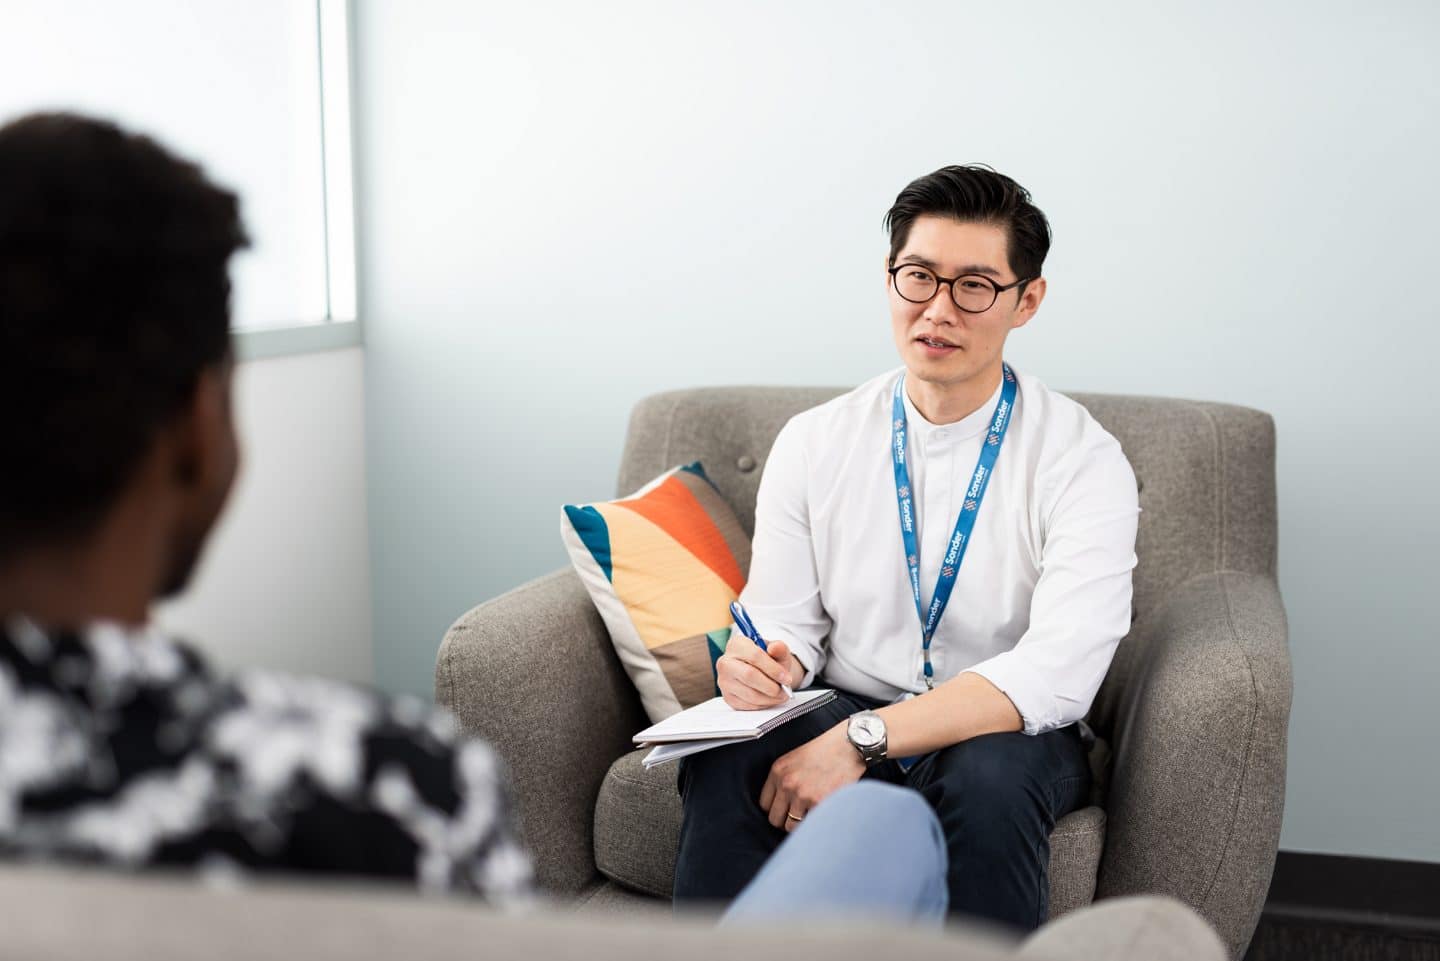 Mental health clinician delivering counselling